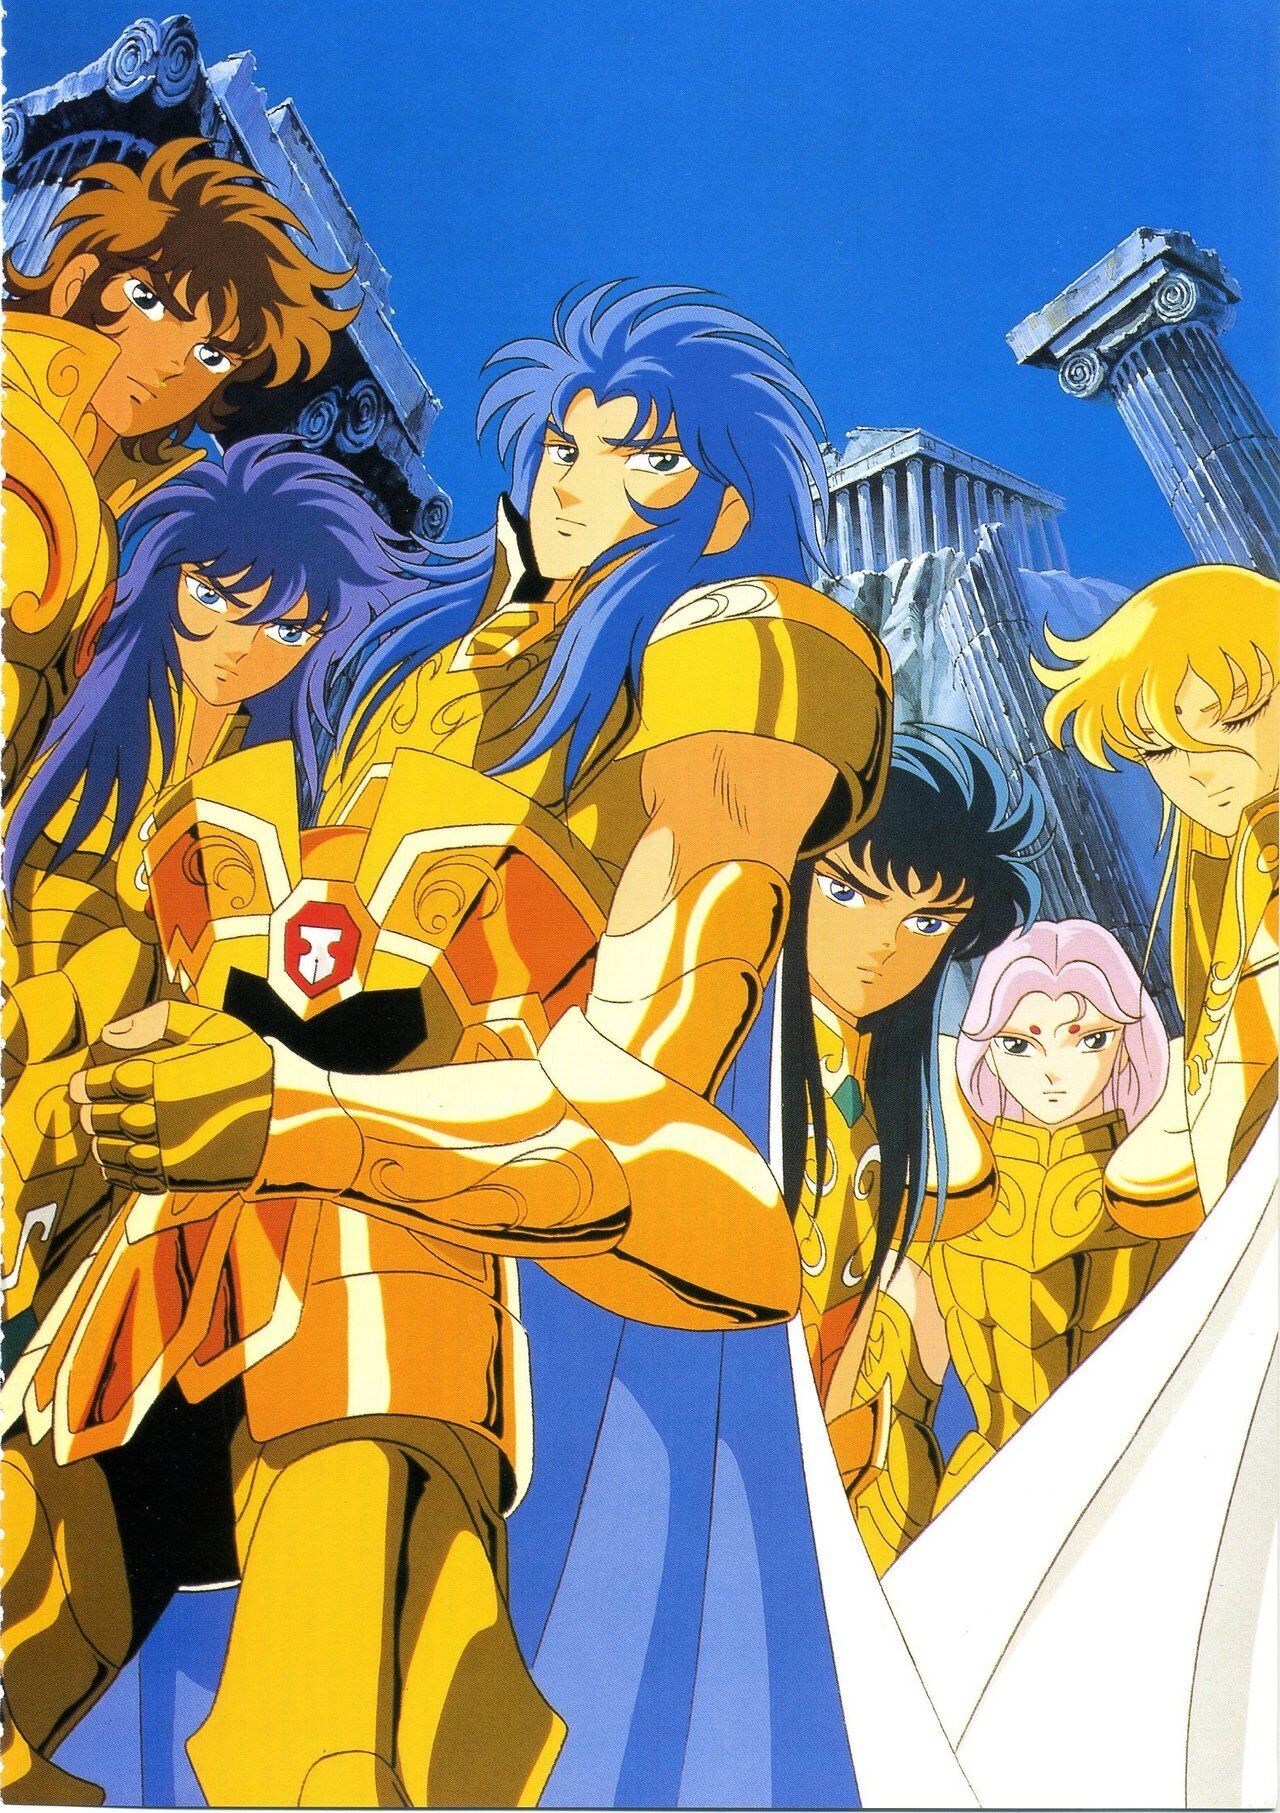 Saint Seiya Soul of Gold OST: A Mighty Soundtrack Made for Warriors 